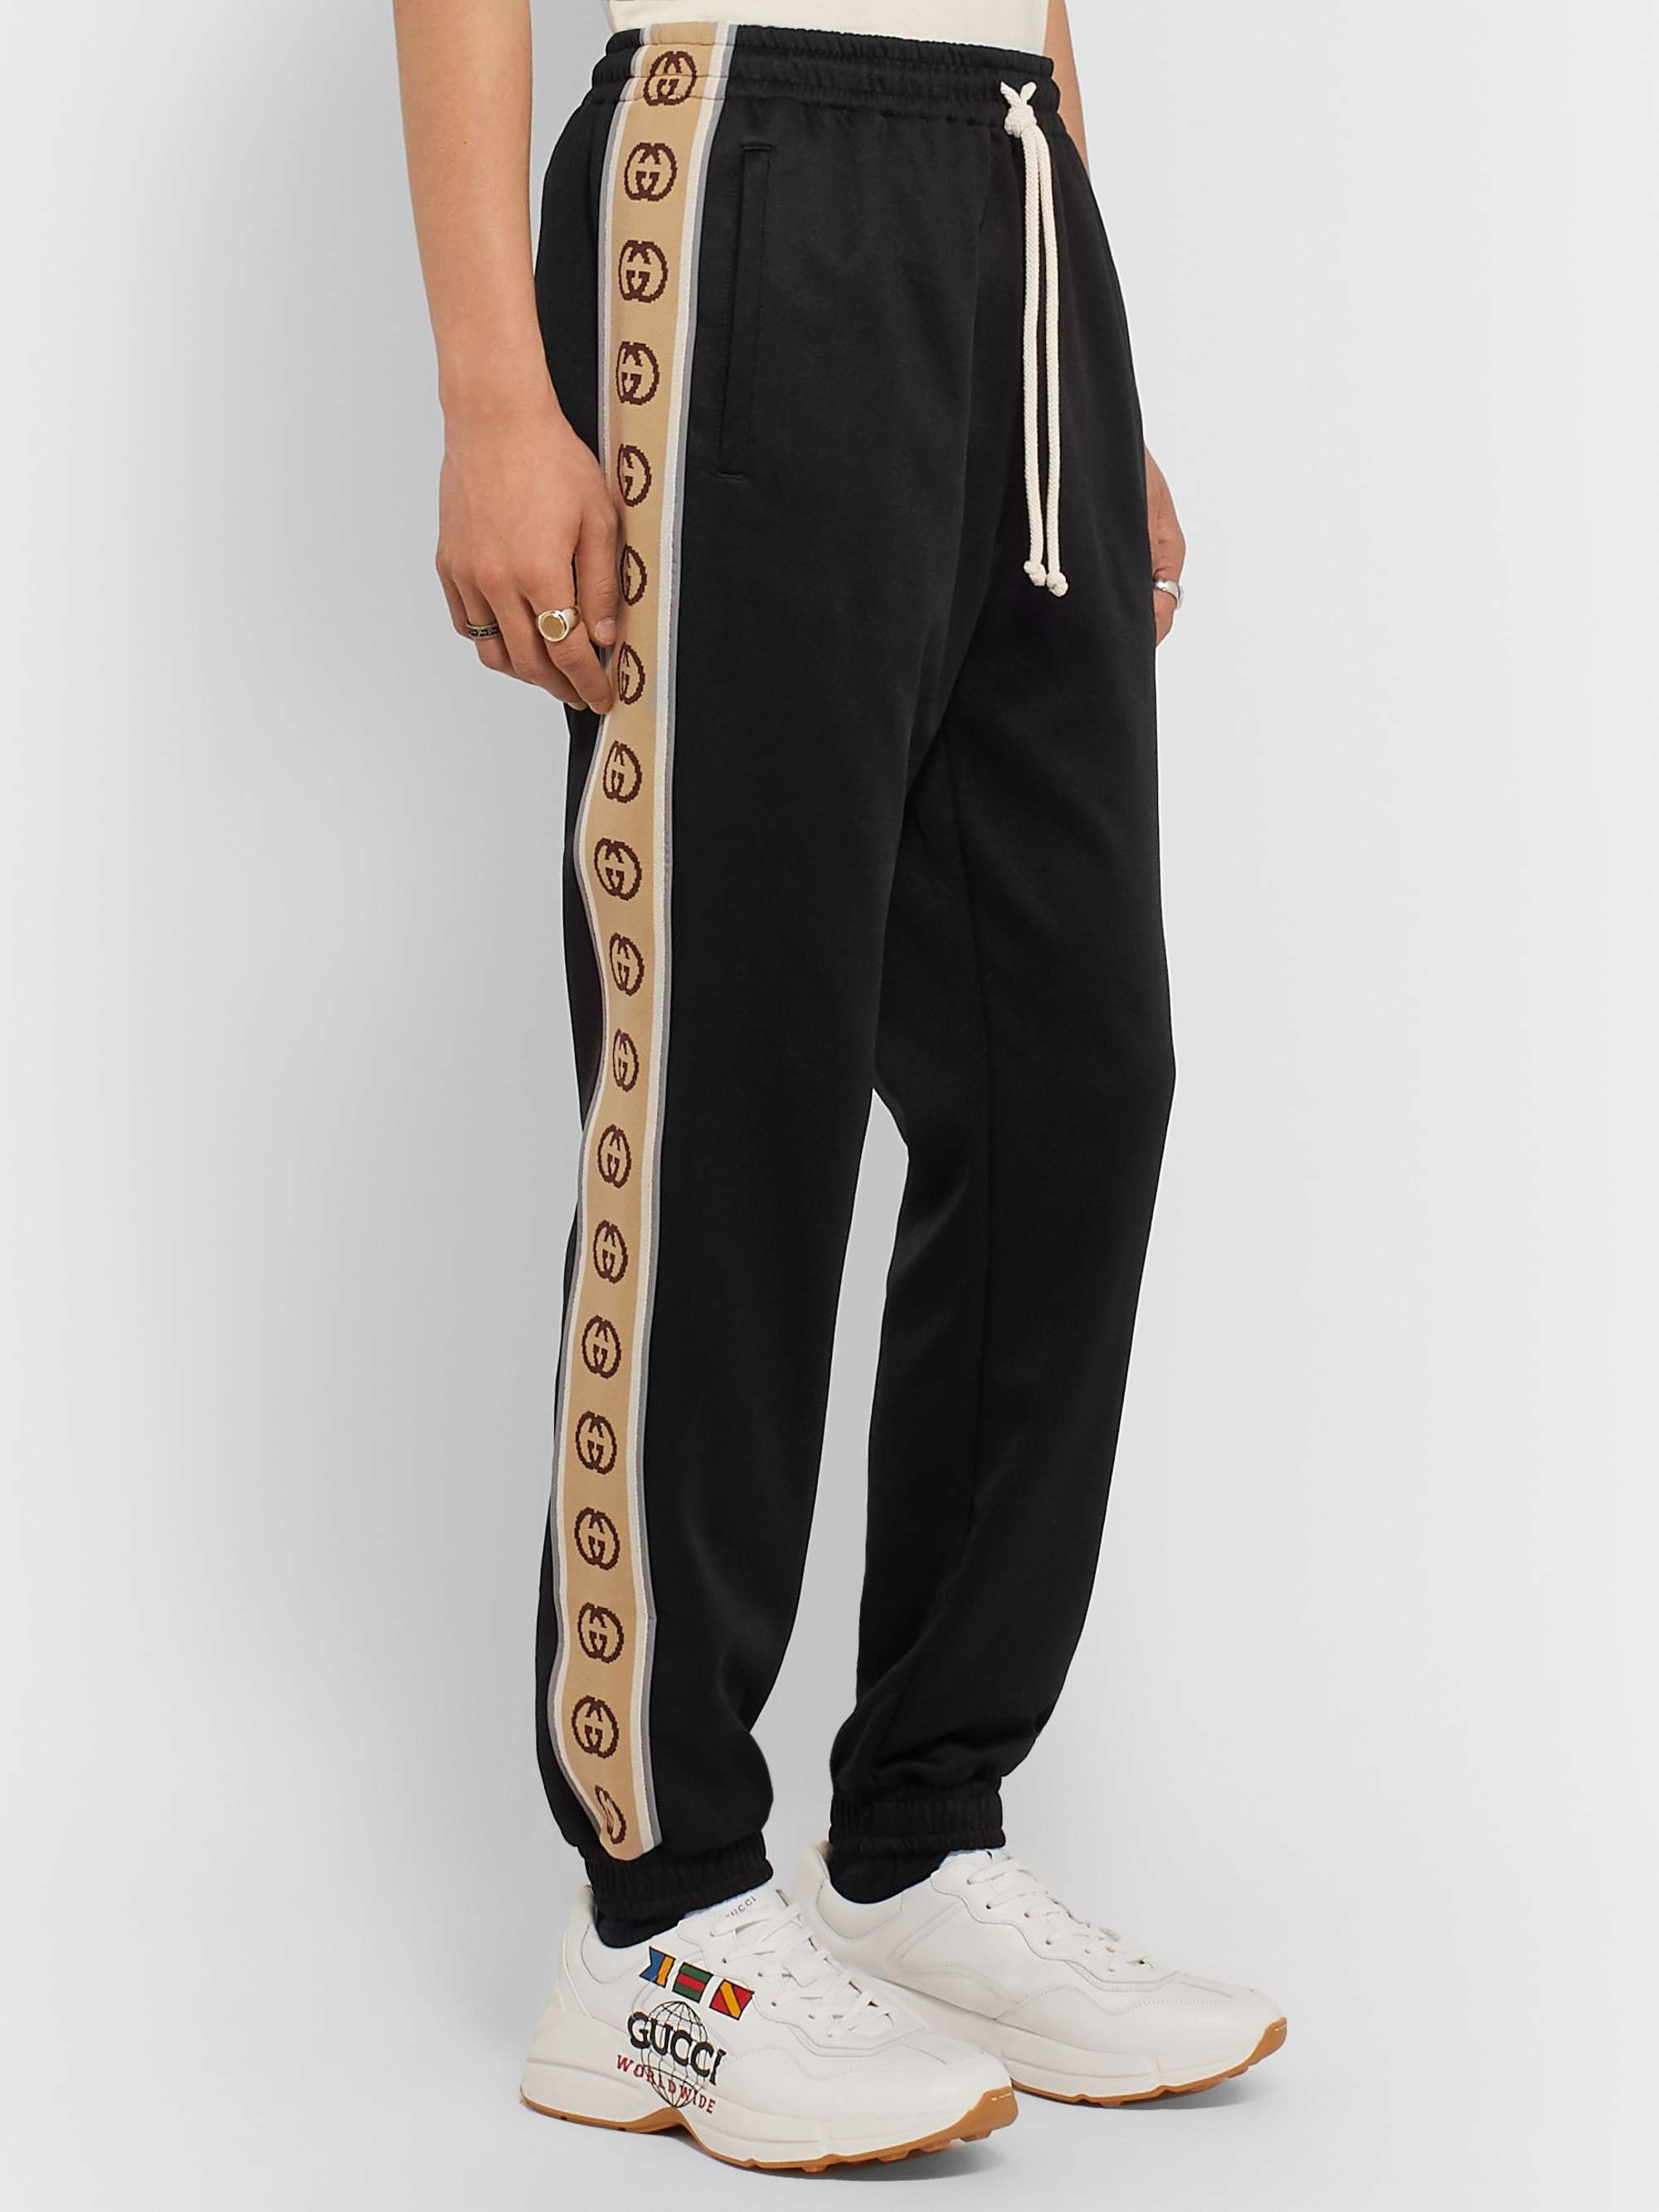 GUCCI Tapered Logo-Jacquard Webbing-Trimmed Tech-Jersey Track Pants for Men